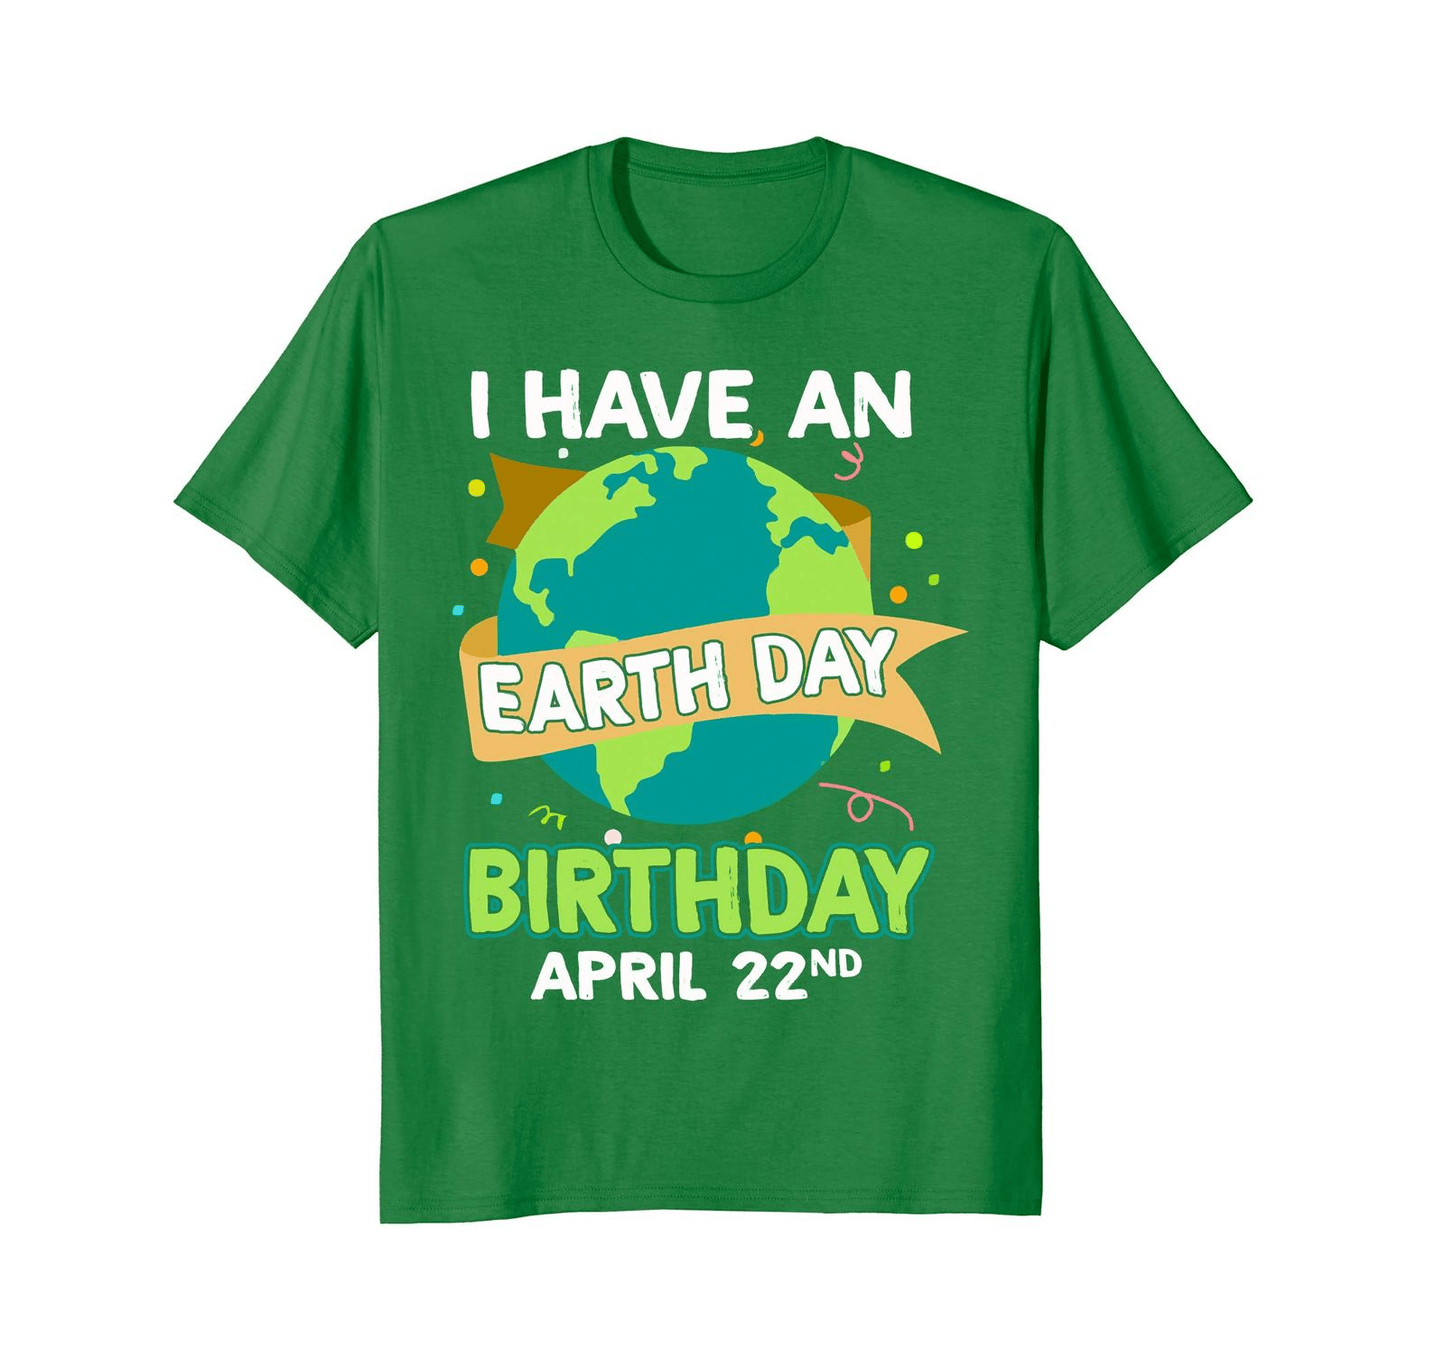 Grafisches Unisex-T-Shirt „I Have an Earth Day Birthday 22nd April Environment Tee Men“. 